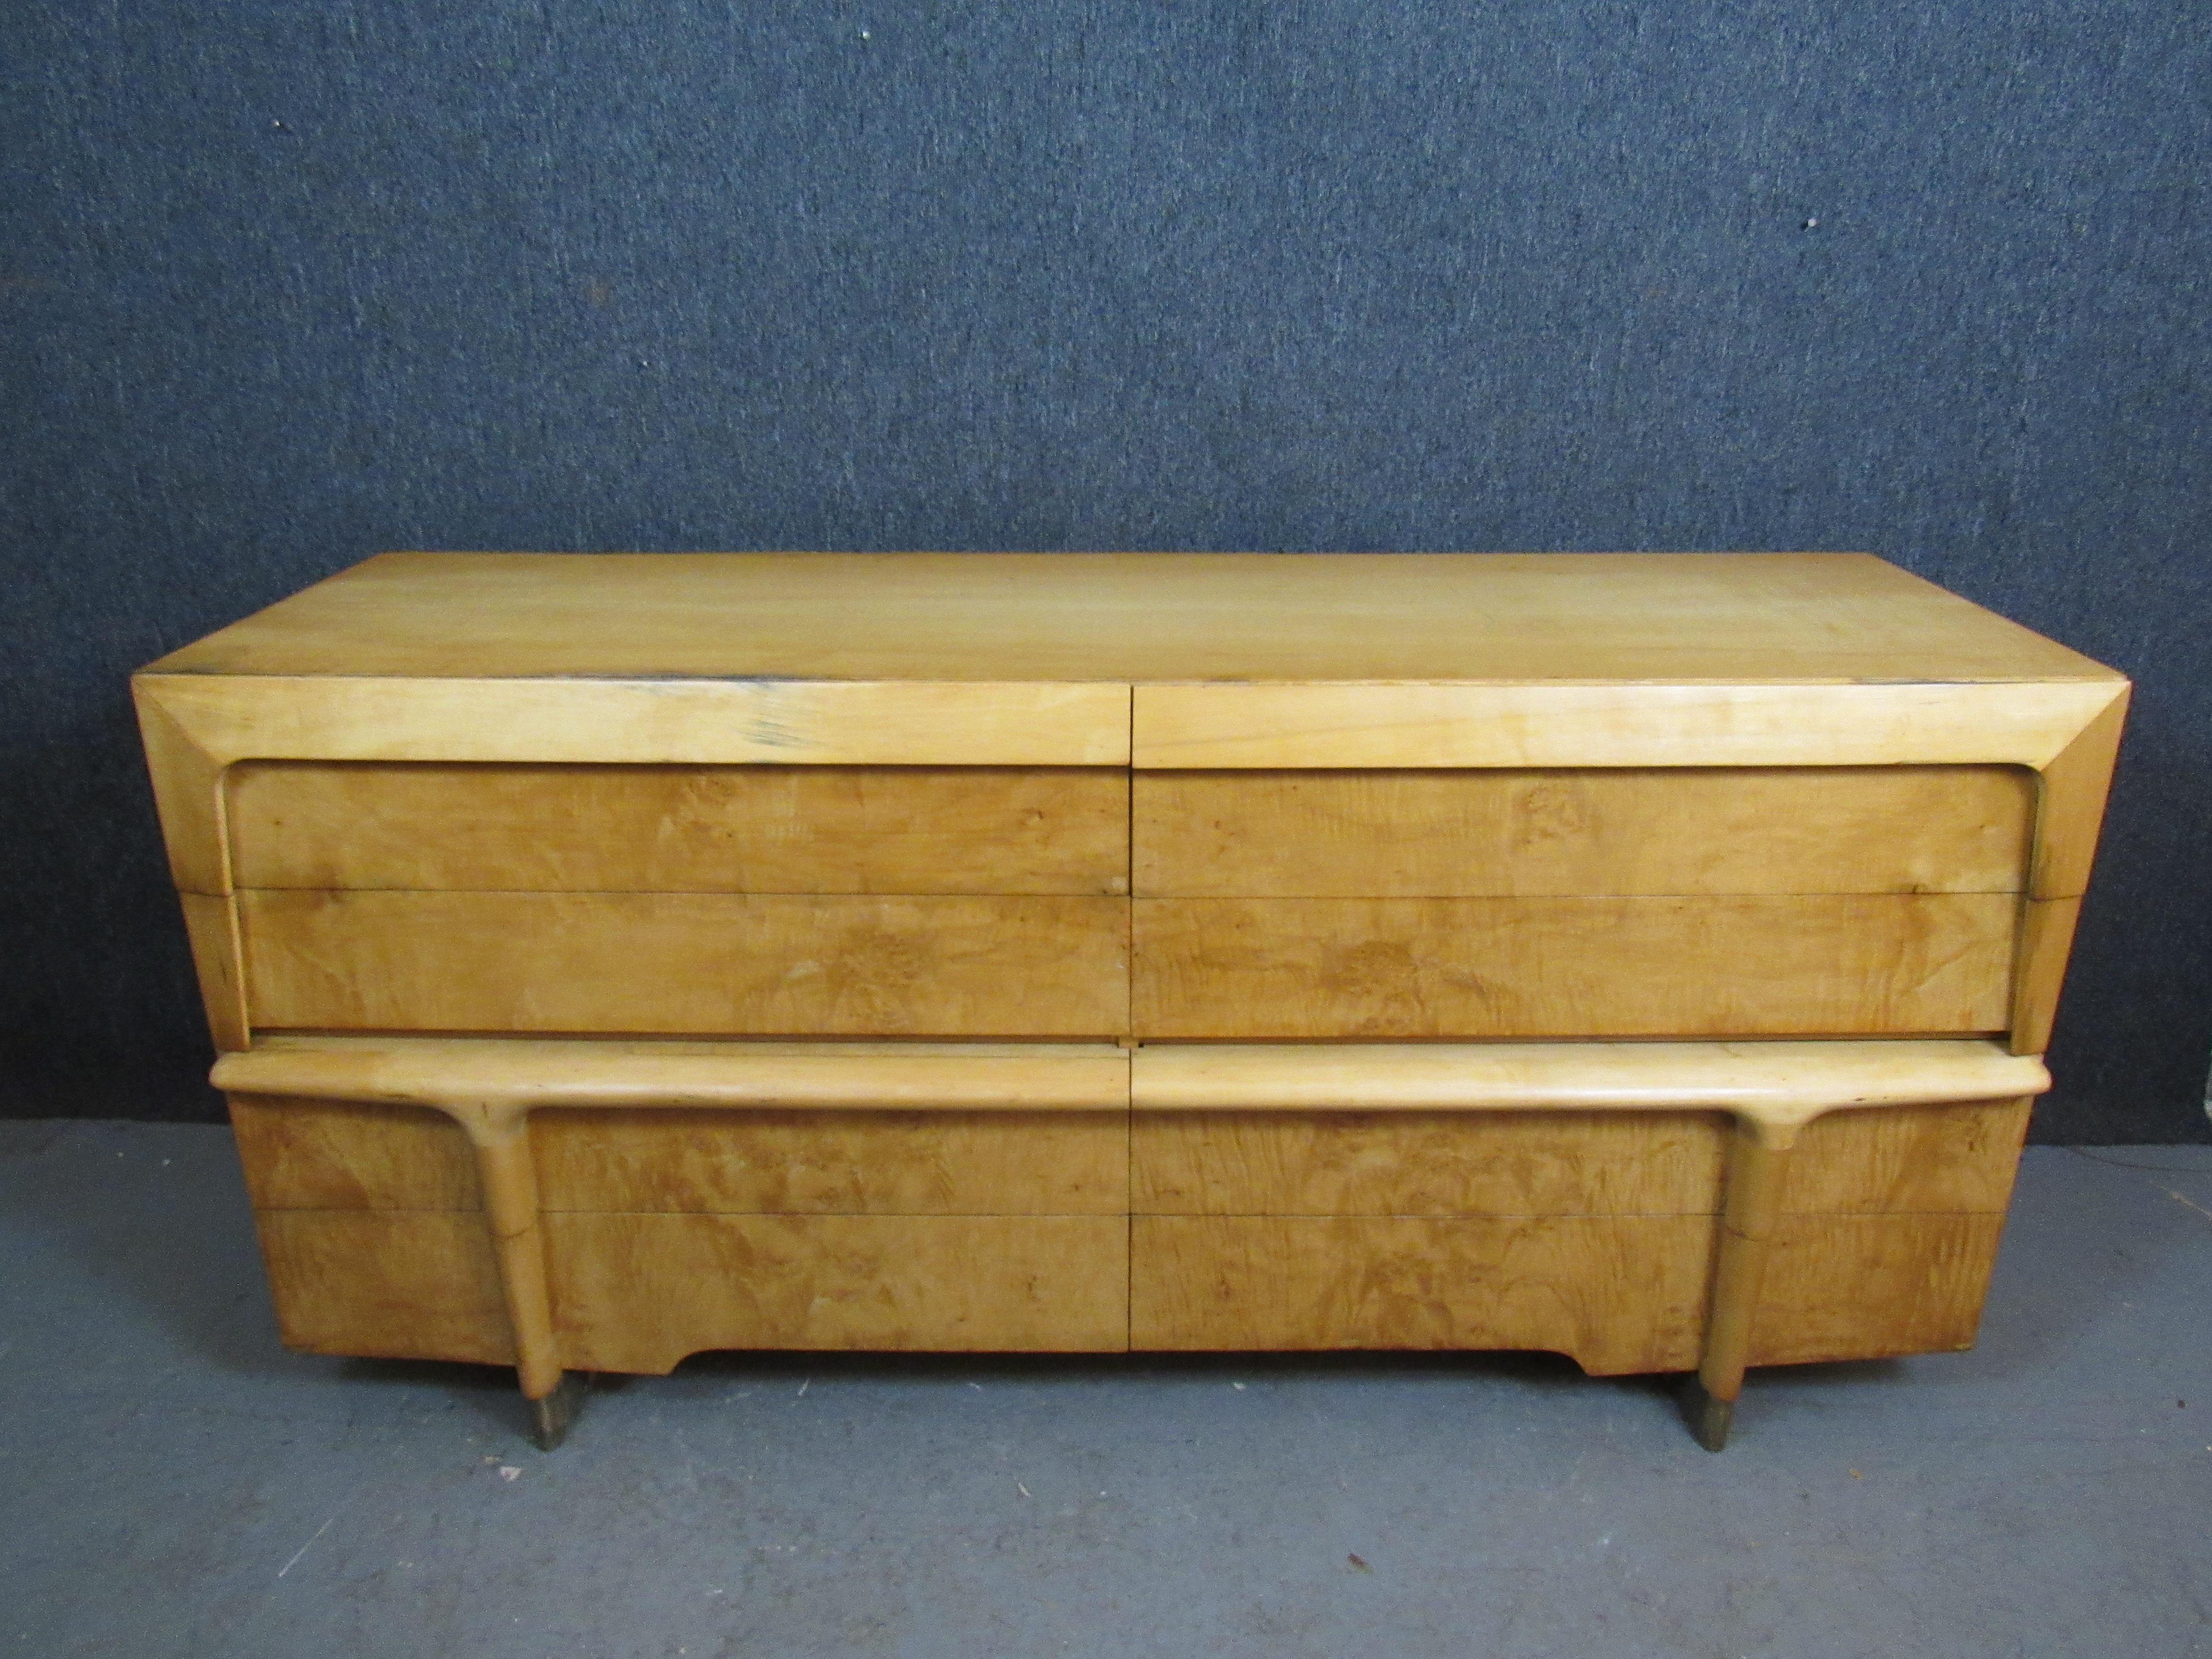 Exceptional lowboy dresser in the unmistakable style of Massachusetts' Heywood Wakefield furniture. A beautiful burled maple veneer elevates the piece to a higher tier of luxury design. Four large lower drawer pull out for ample storage of blankets,